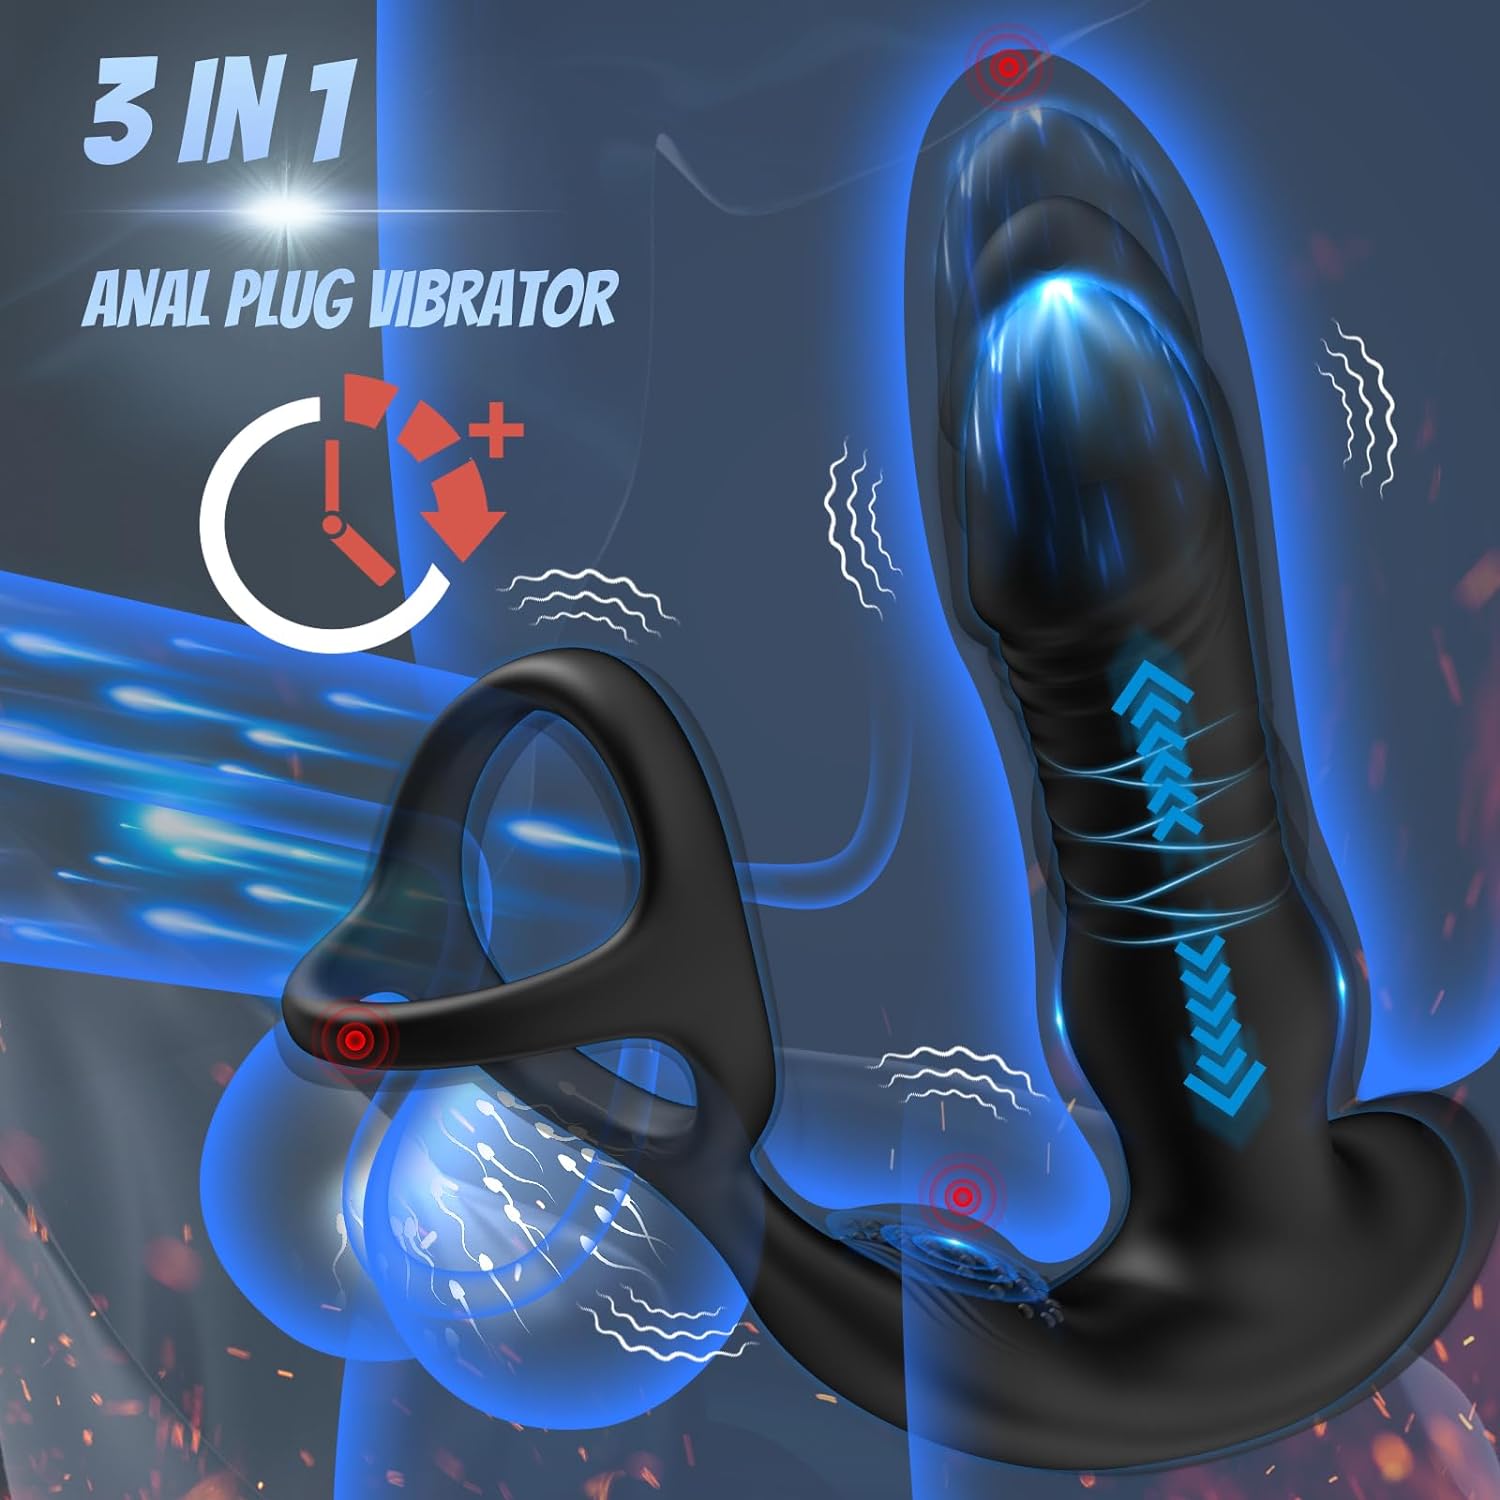 Thrusting Anal Vibrator Prostate Massager Vibrating Butt Plug With Penis Ring, Anal Plug Remote Control Vibrators With 3 Thrusting & 10 Vibrating Modes, Anal Beads Dildo Male Sex Toys for Men Pleasure